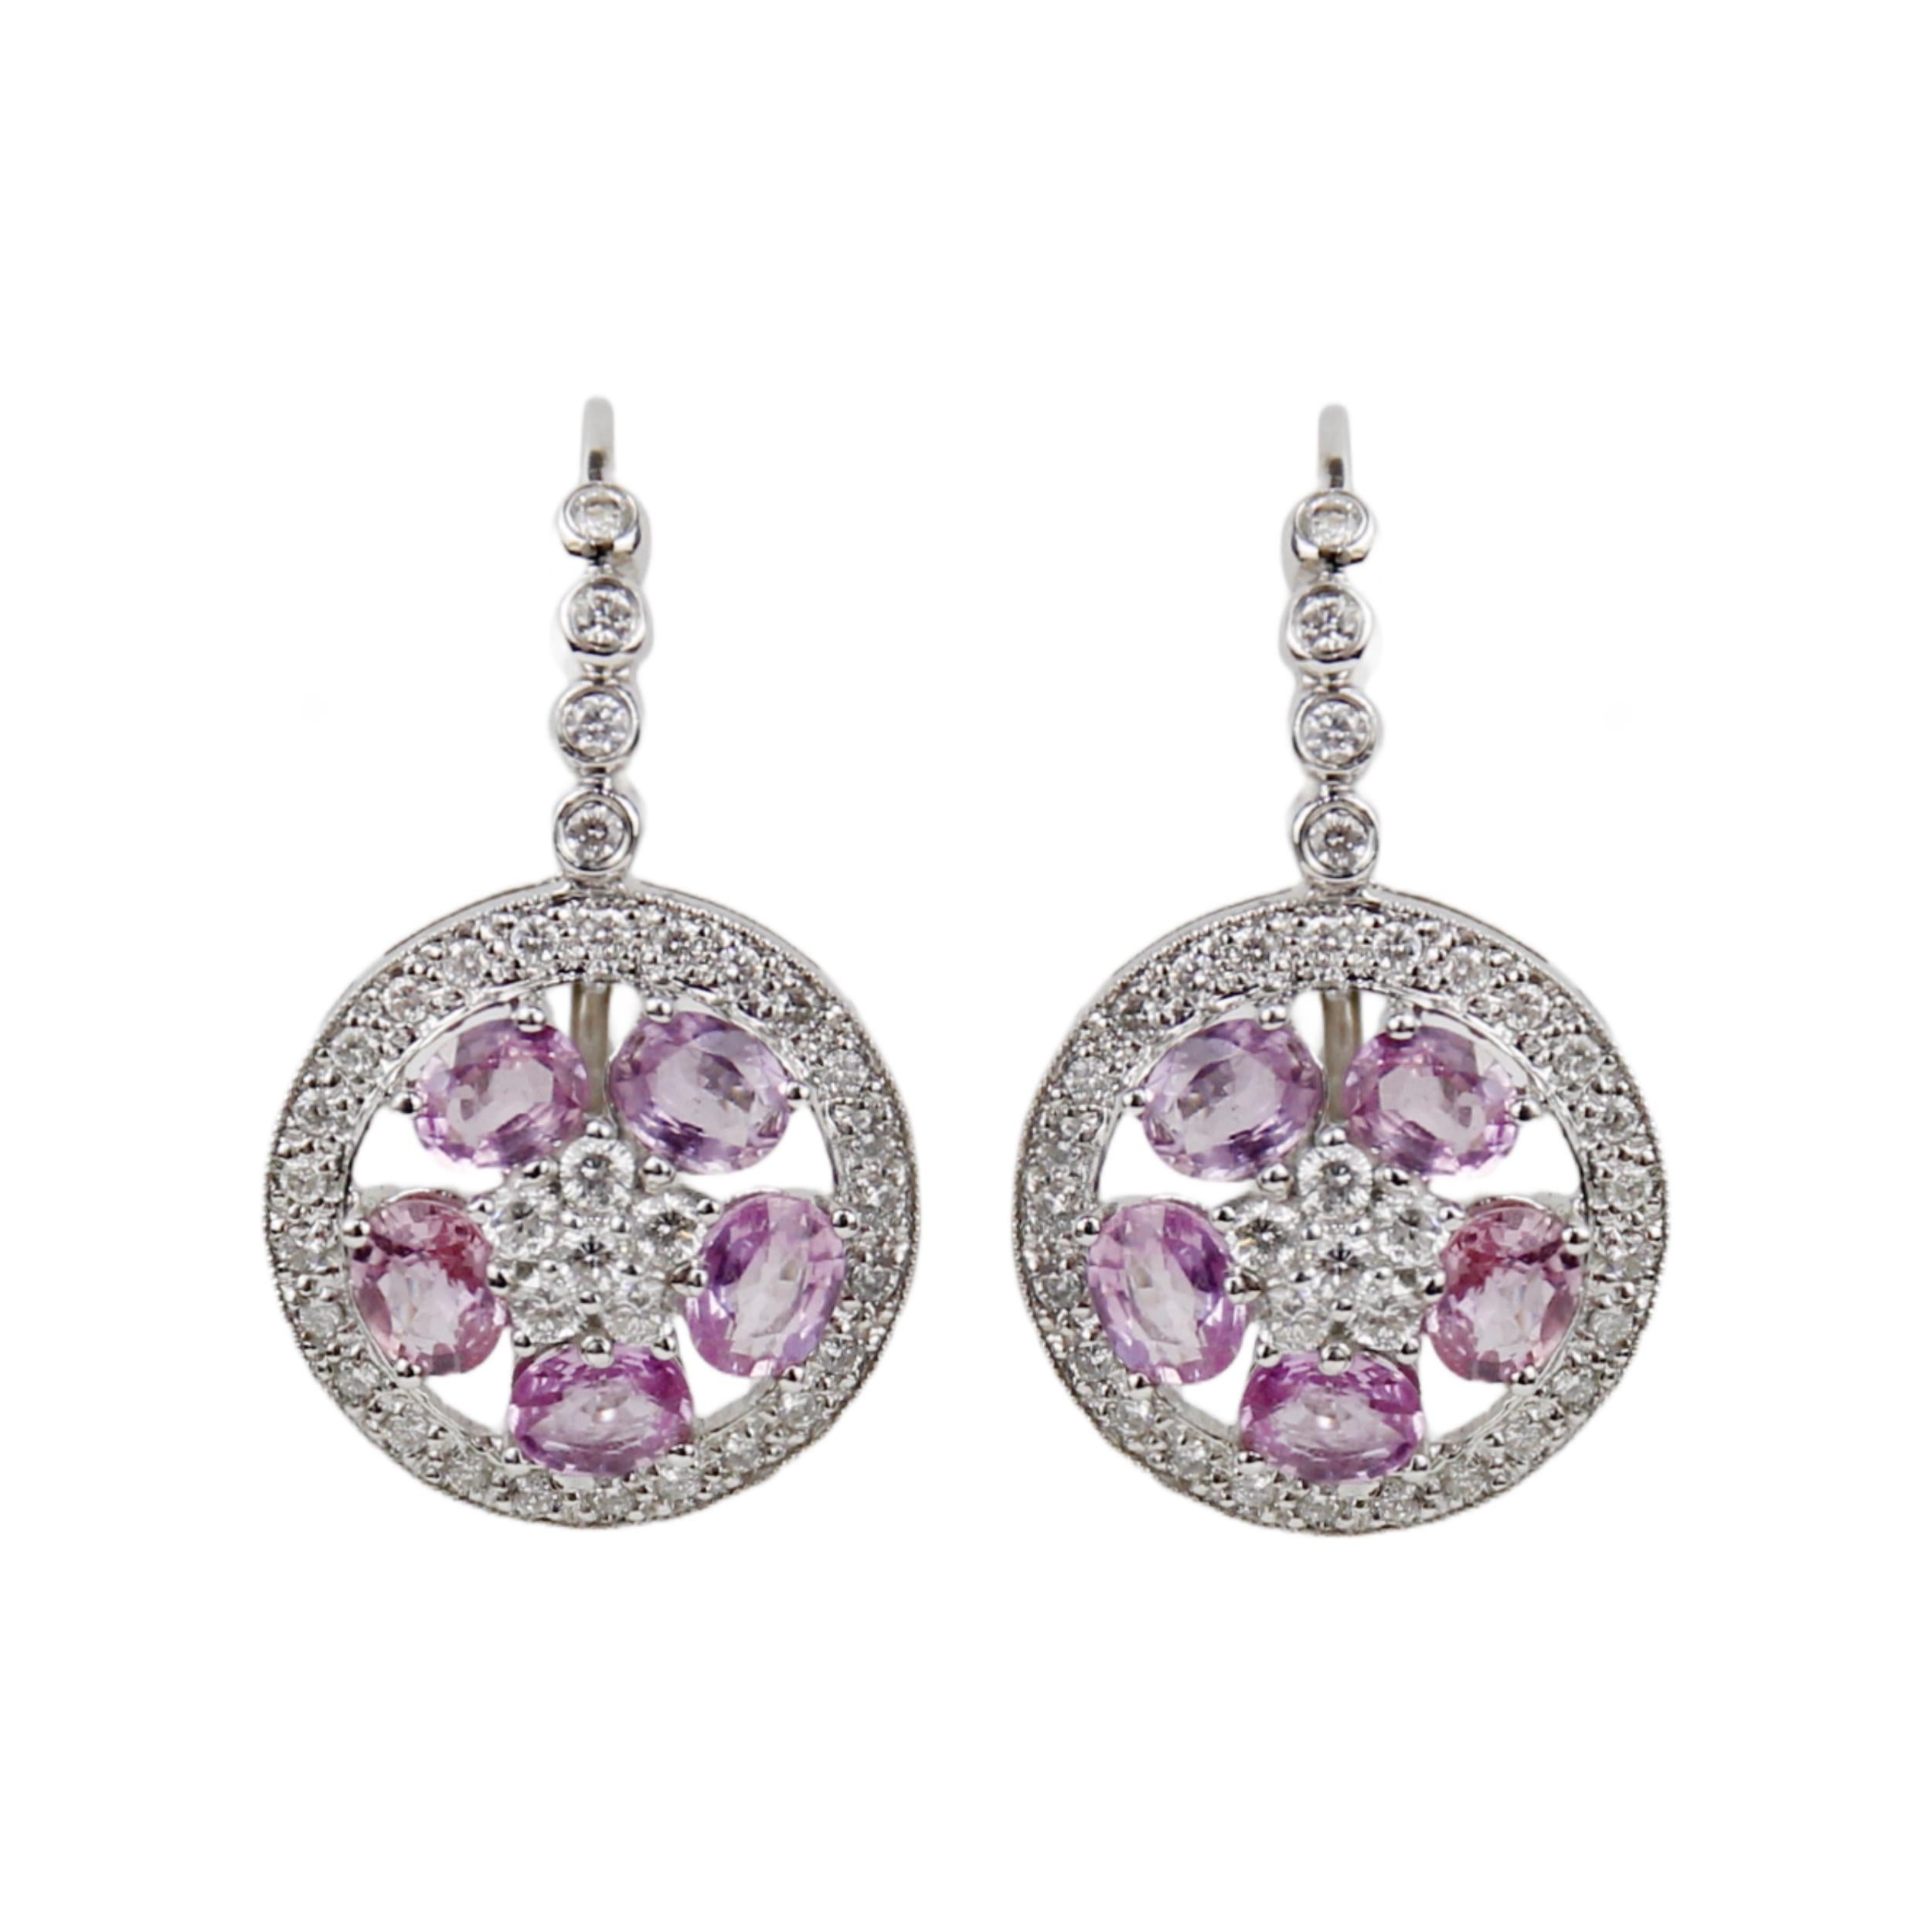 East Coast Jewelry Collection
Flower Earrings
Diamond: 0.96cts
Pink Sapphire: 4.43cts
Reference number: ECJ01142